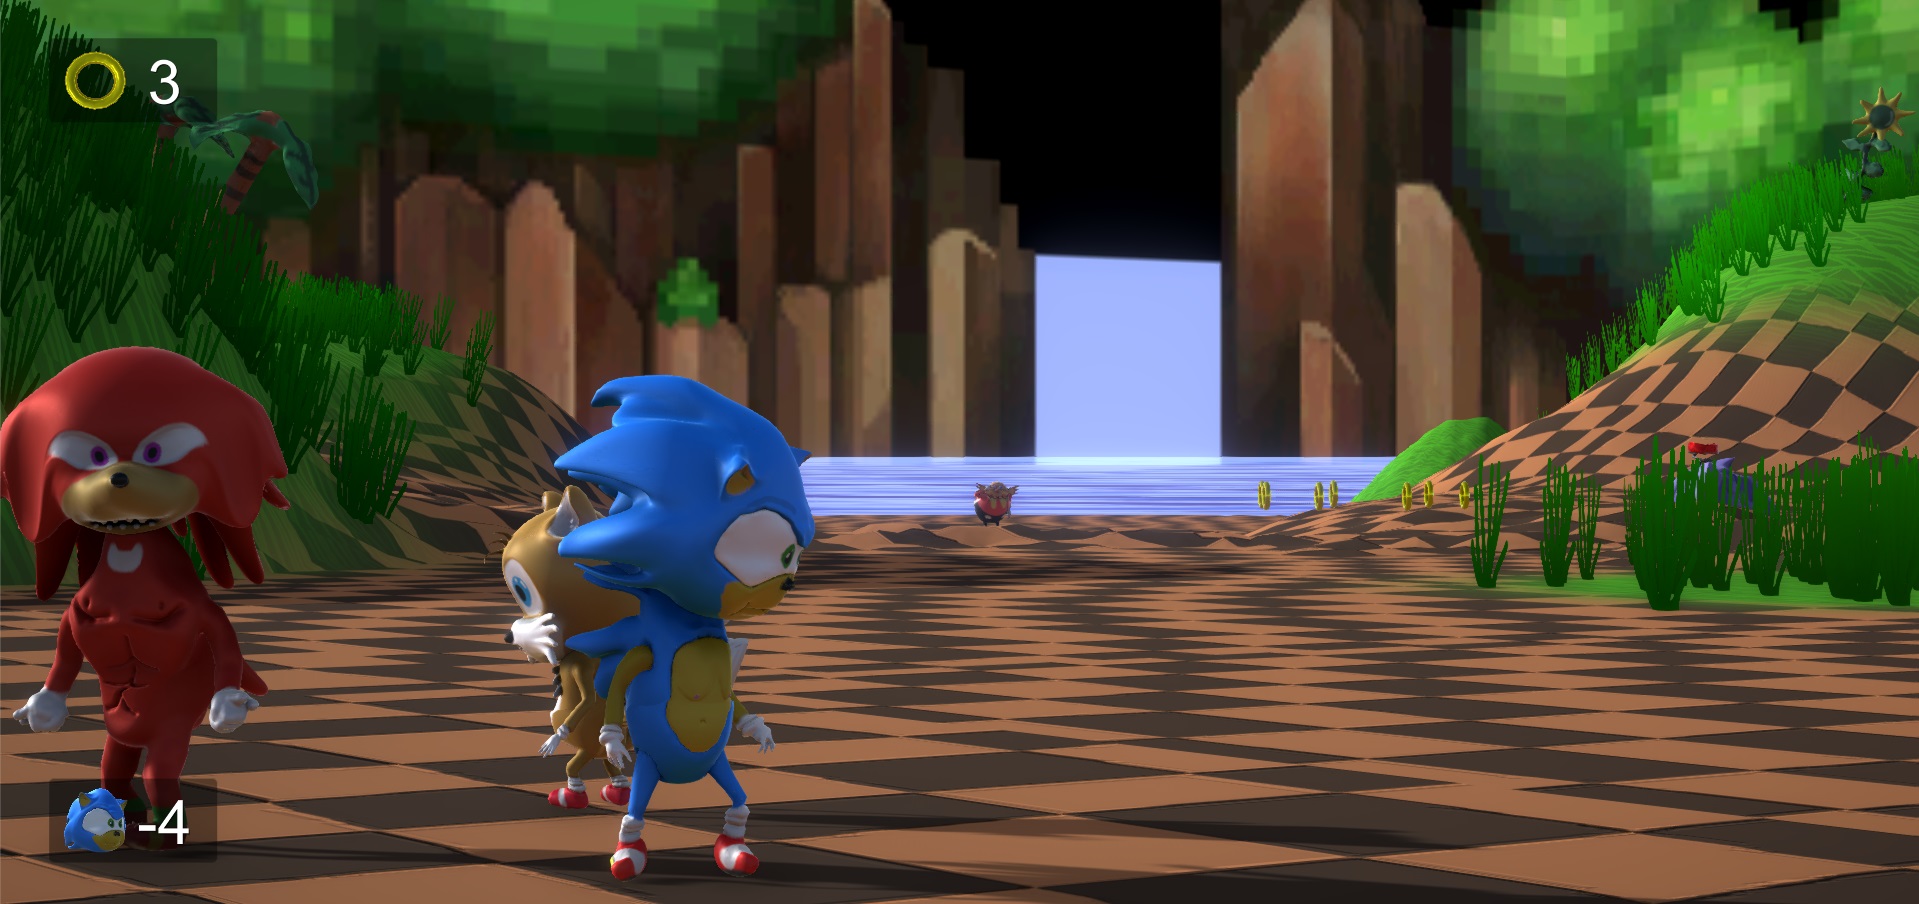 Sonic Suggests By 3di70r - try watching this video on www youtube com or enable javascript if it is disabled in your browser